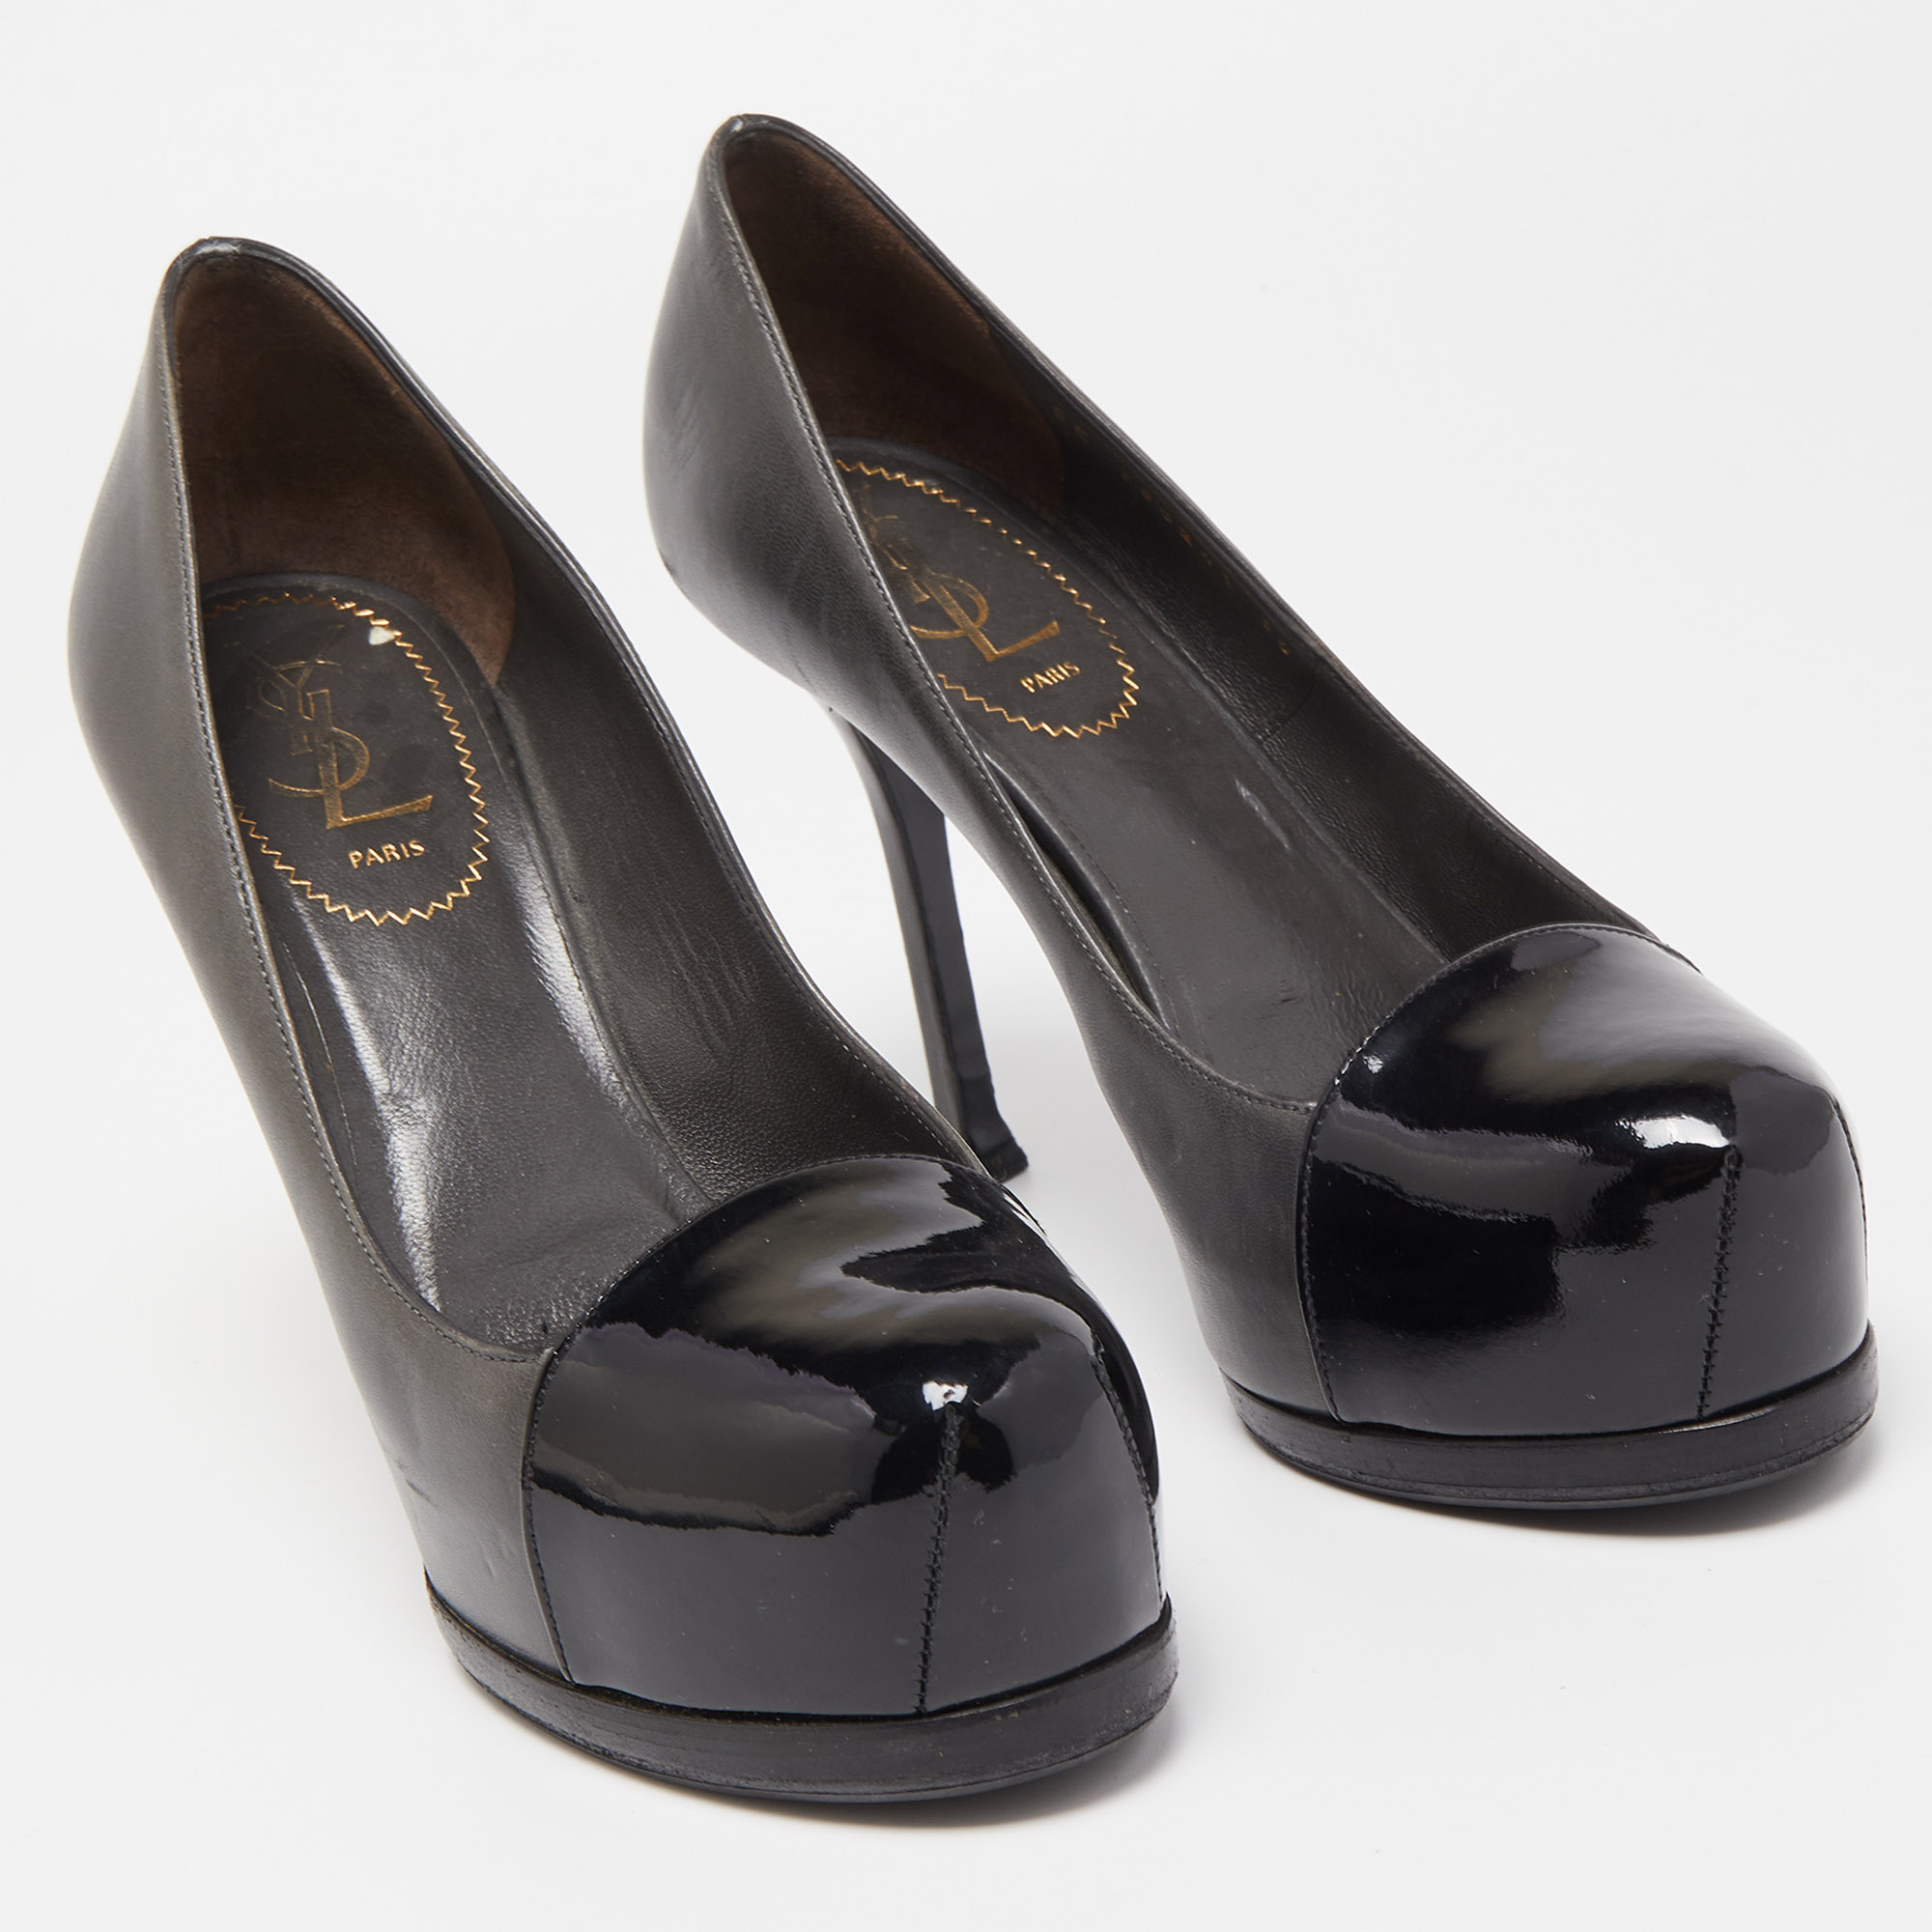 Yves Saint Laurent Grey/Black Leather And Patent Tribtoo Pumps Size 36